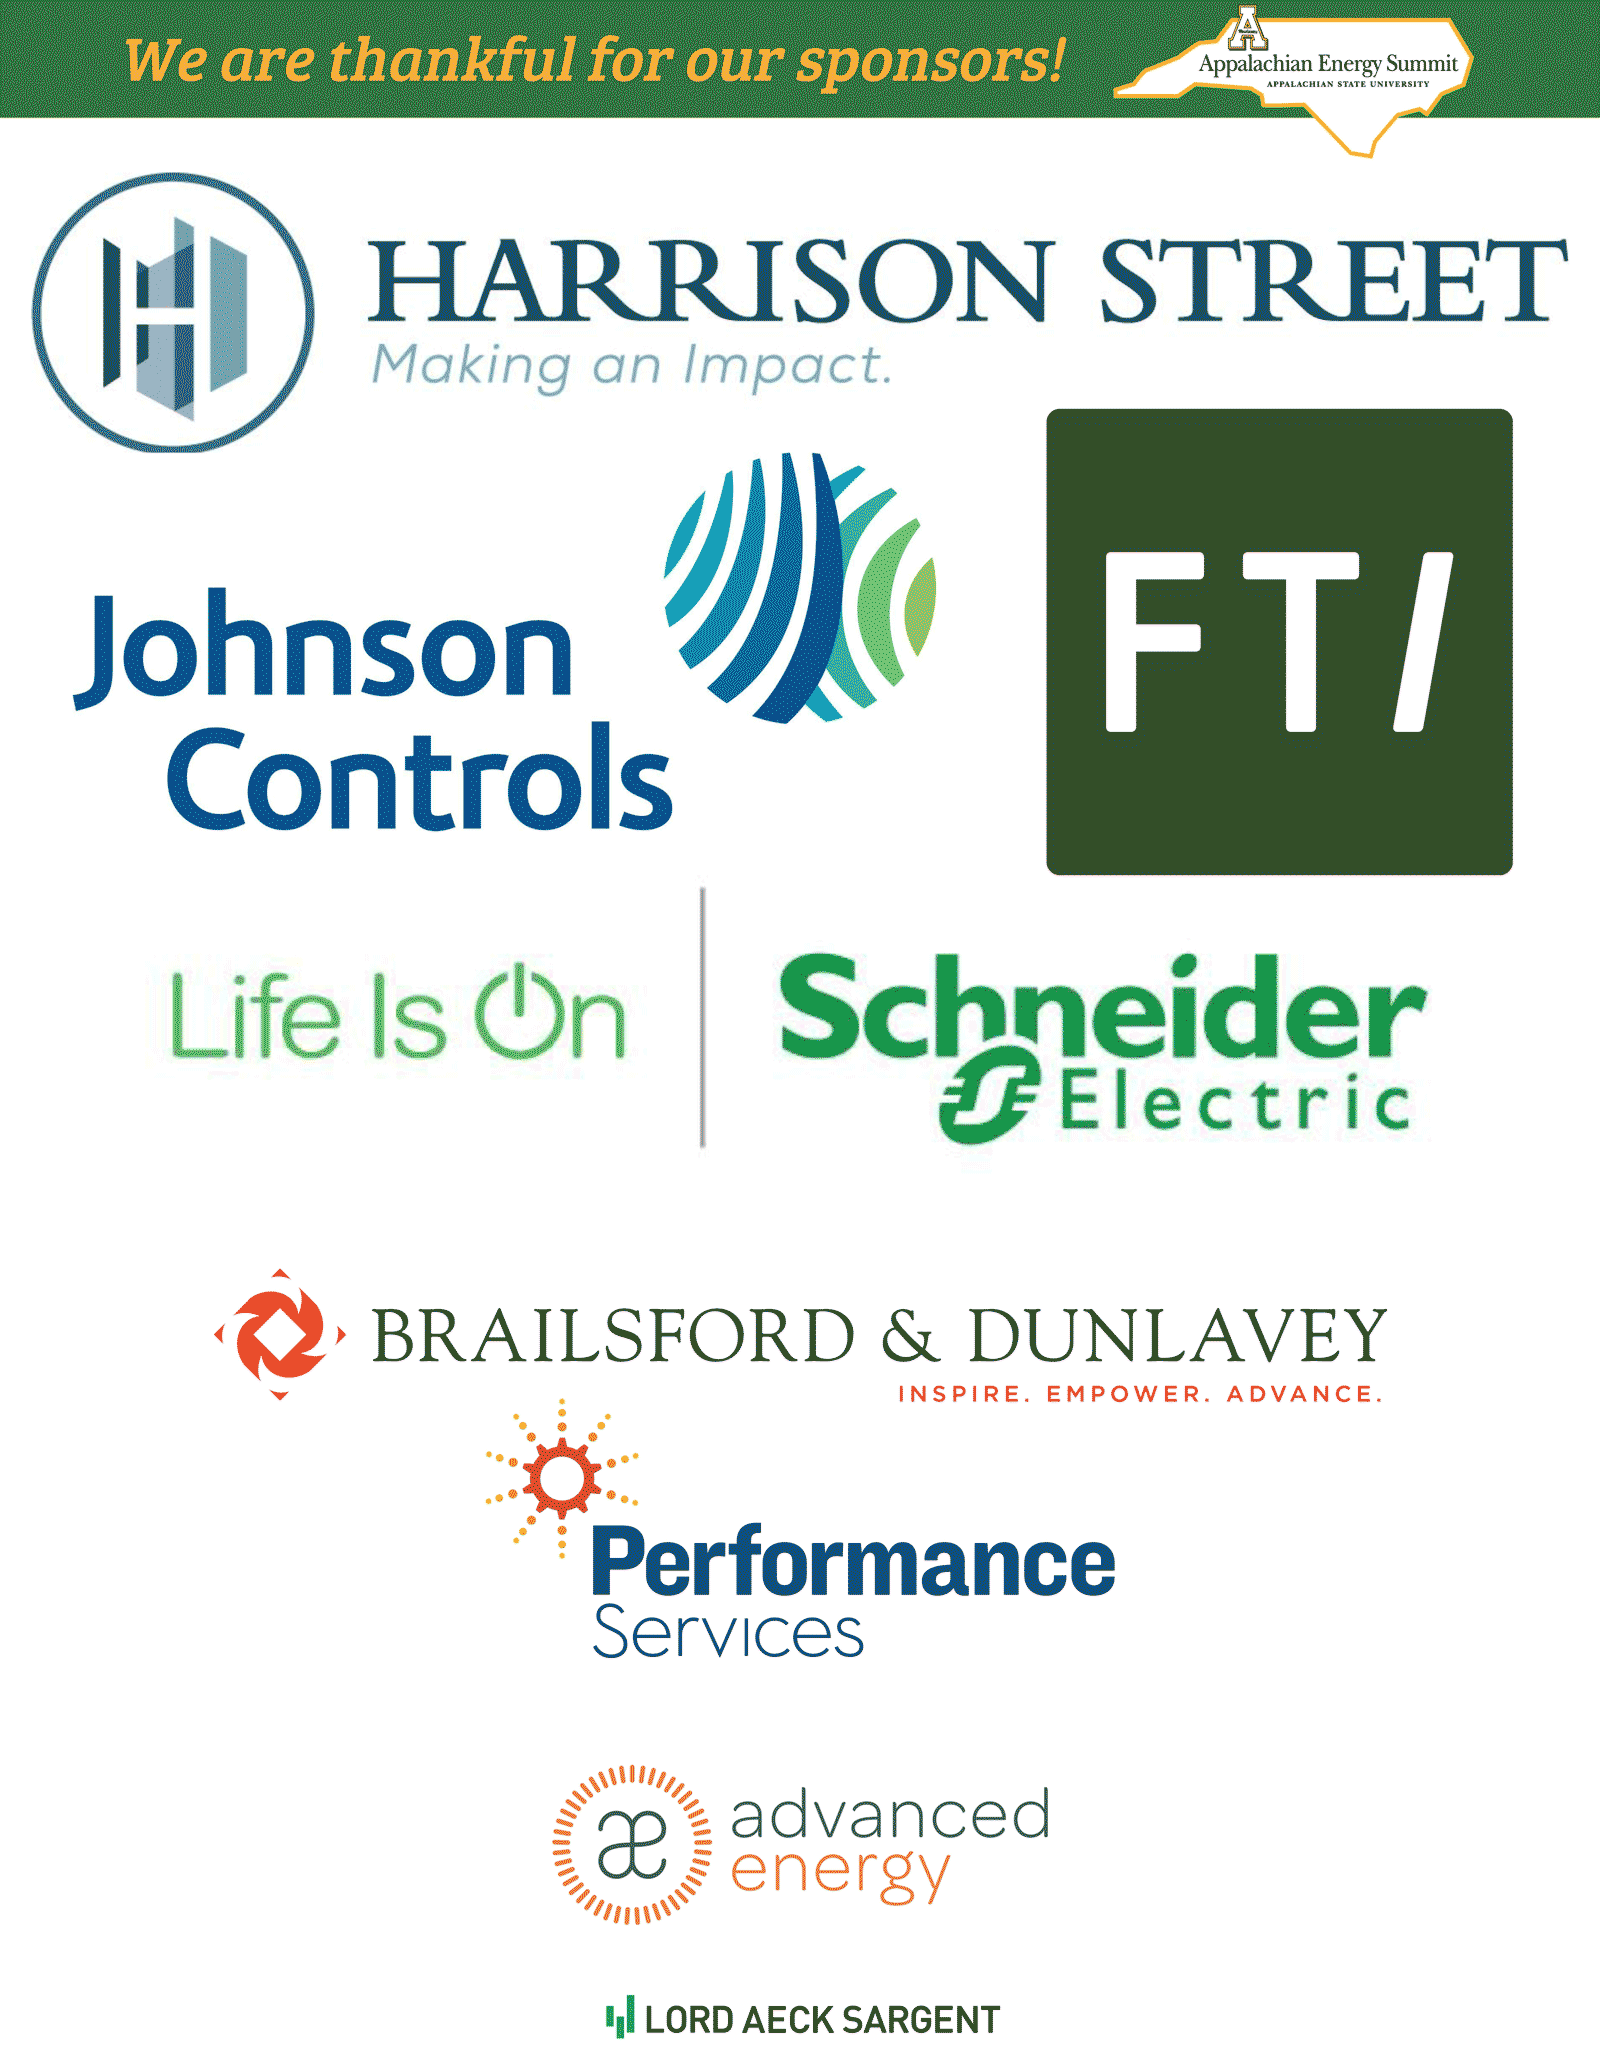 We are thankful for our sponsors! Harrison Street, Johnson Controls, FTI, Life is On, Schneider Electric, Brailsford and Dunlavey, Performance Services, Advanced Energy, Lord Aeck Sargent